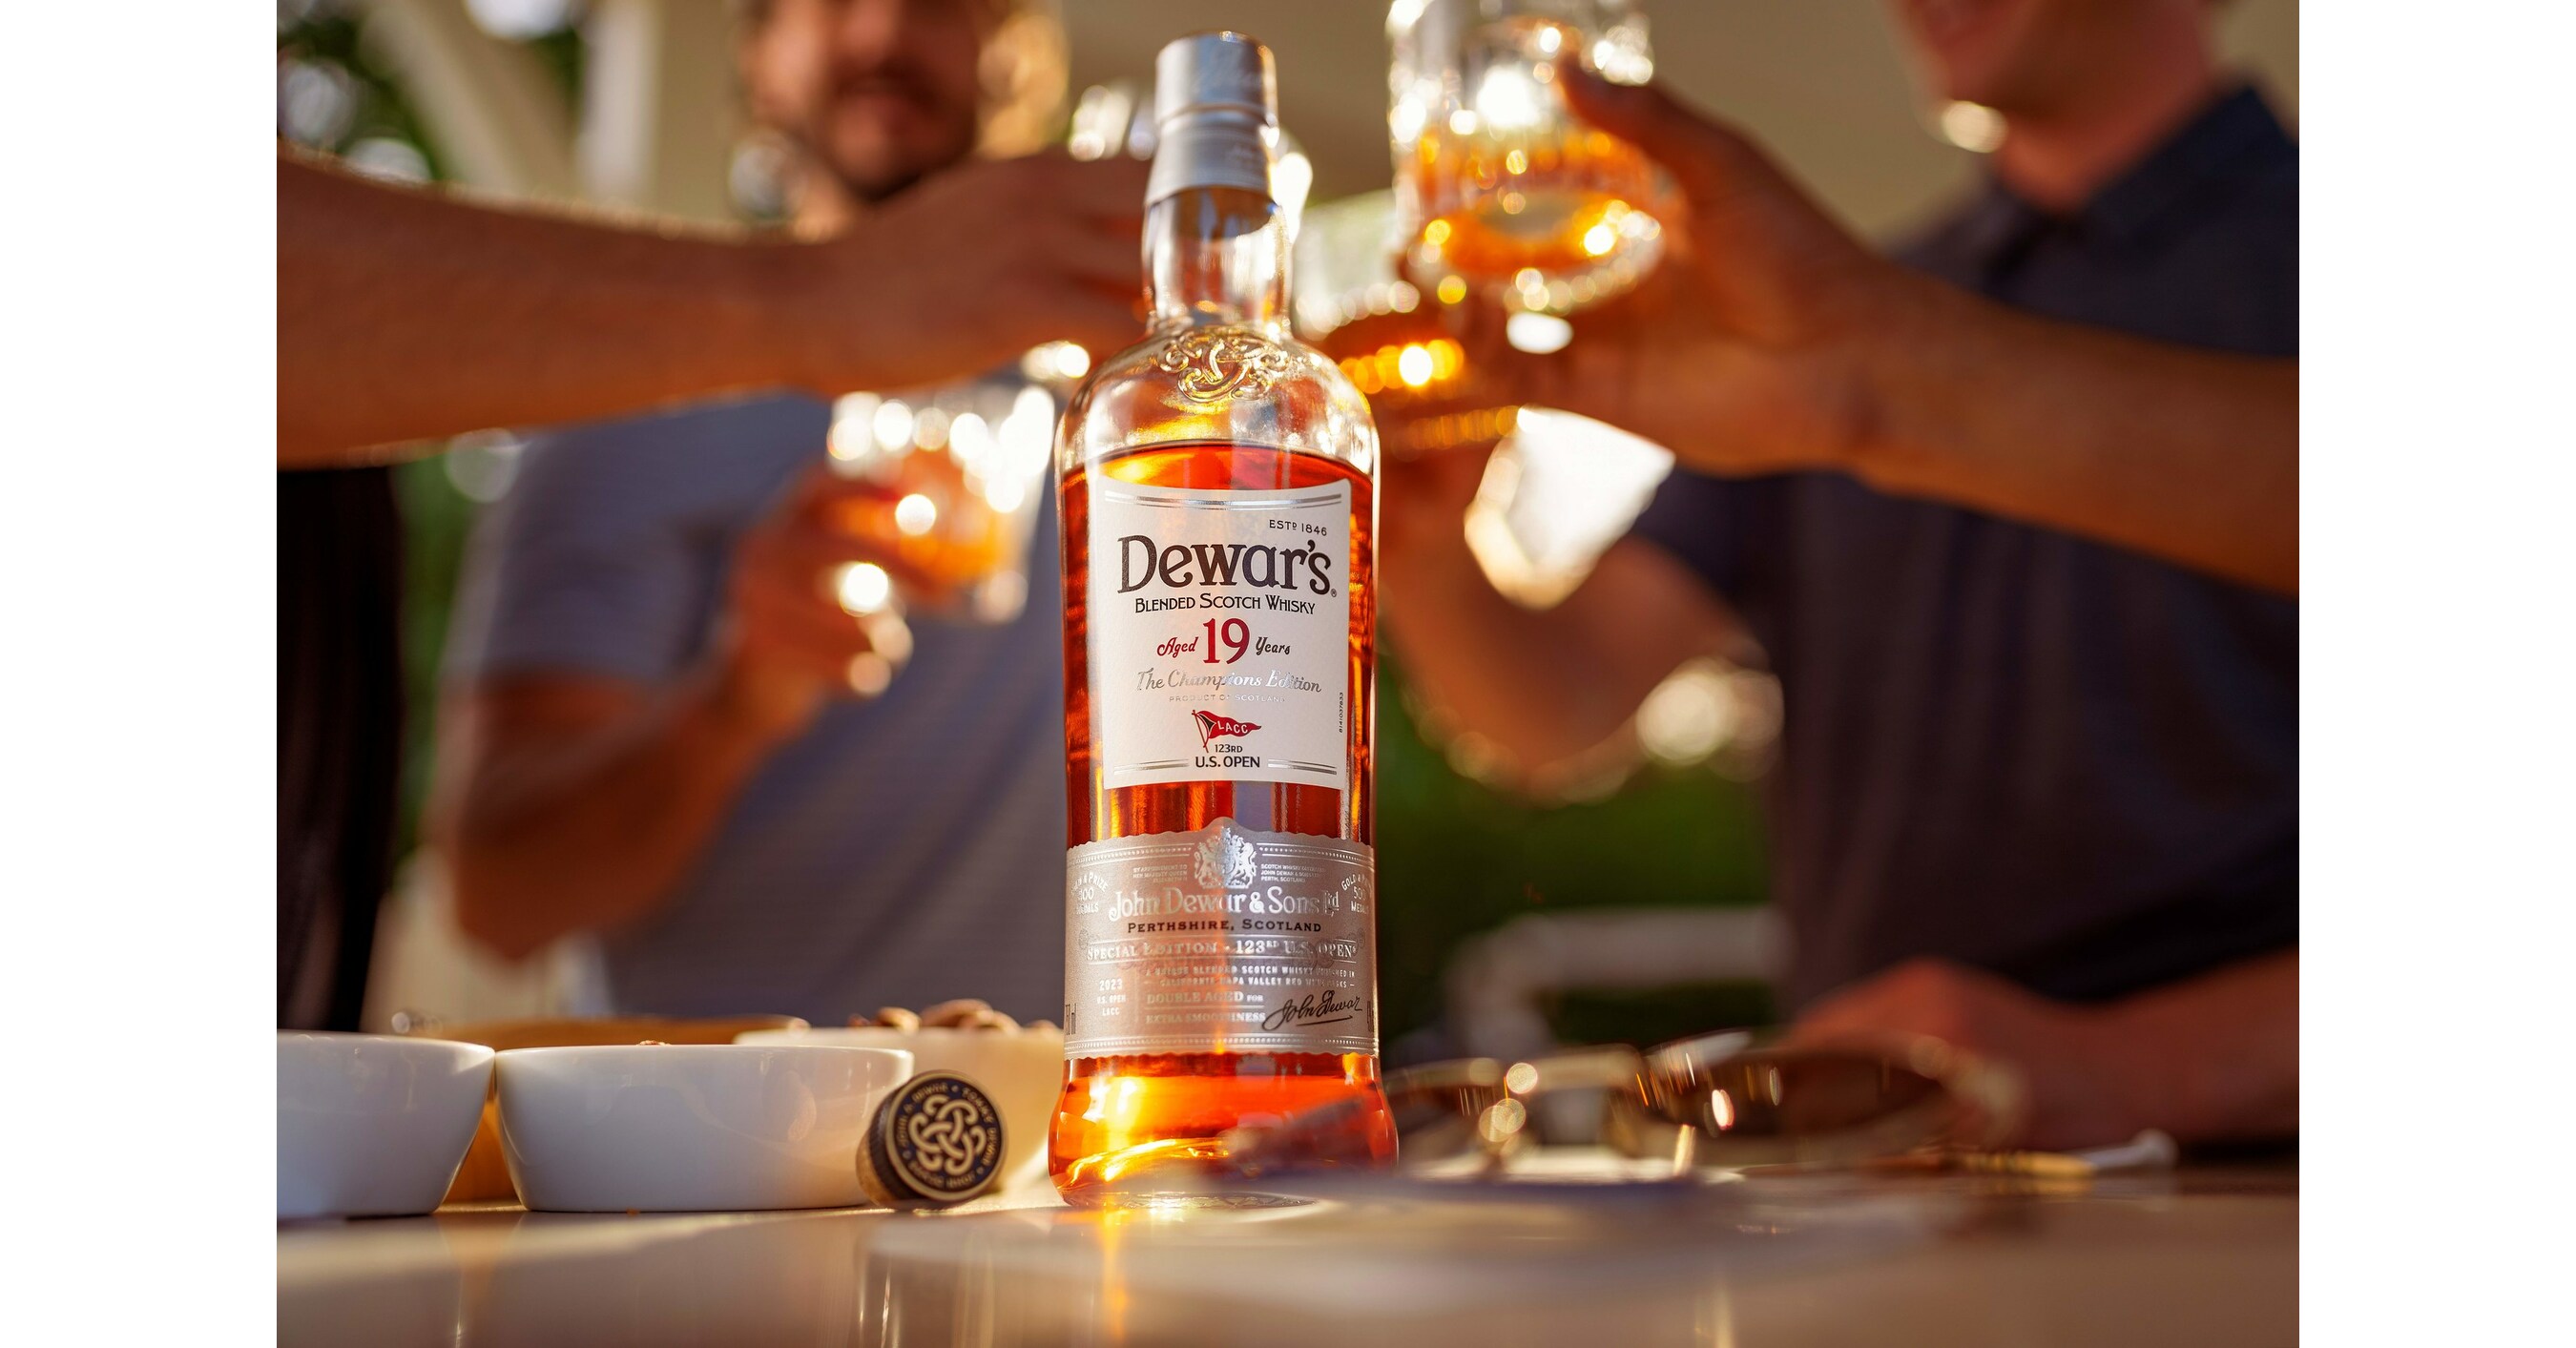 7 things golfers should know about whiskey, according to an expert